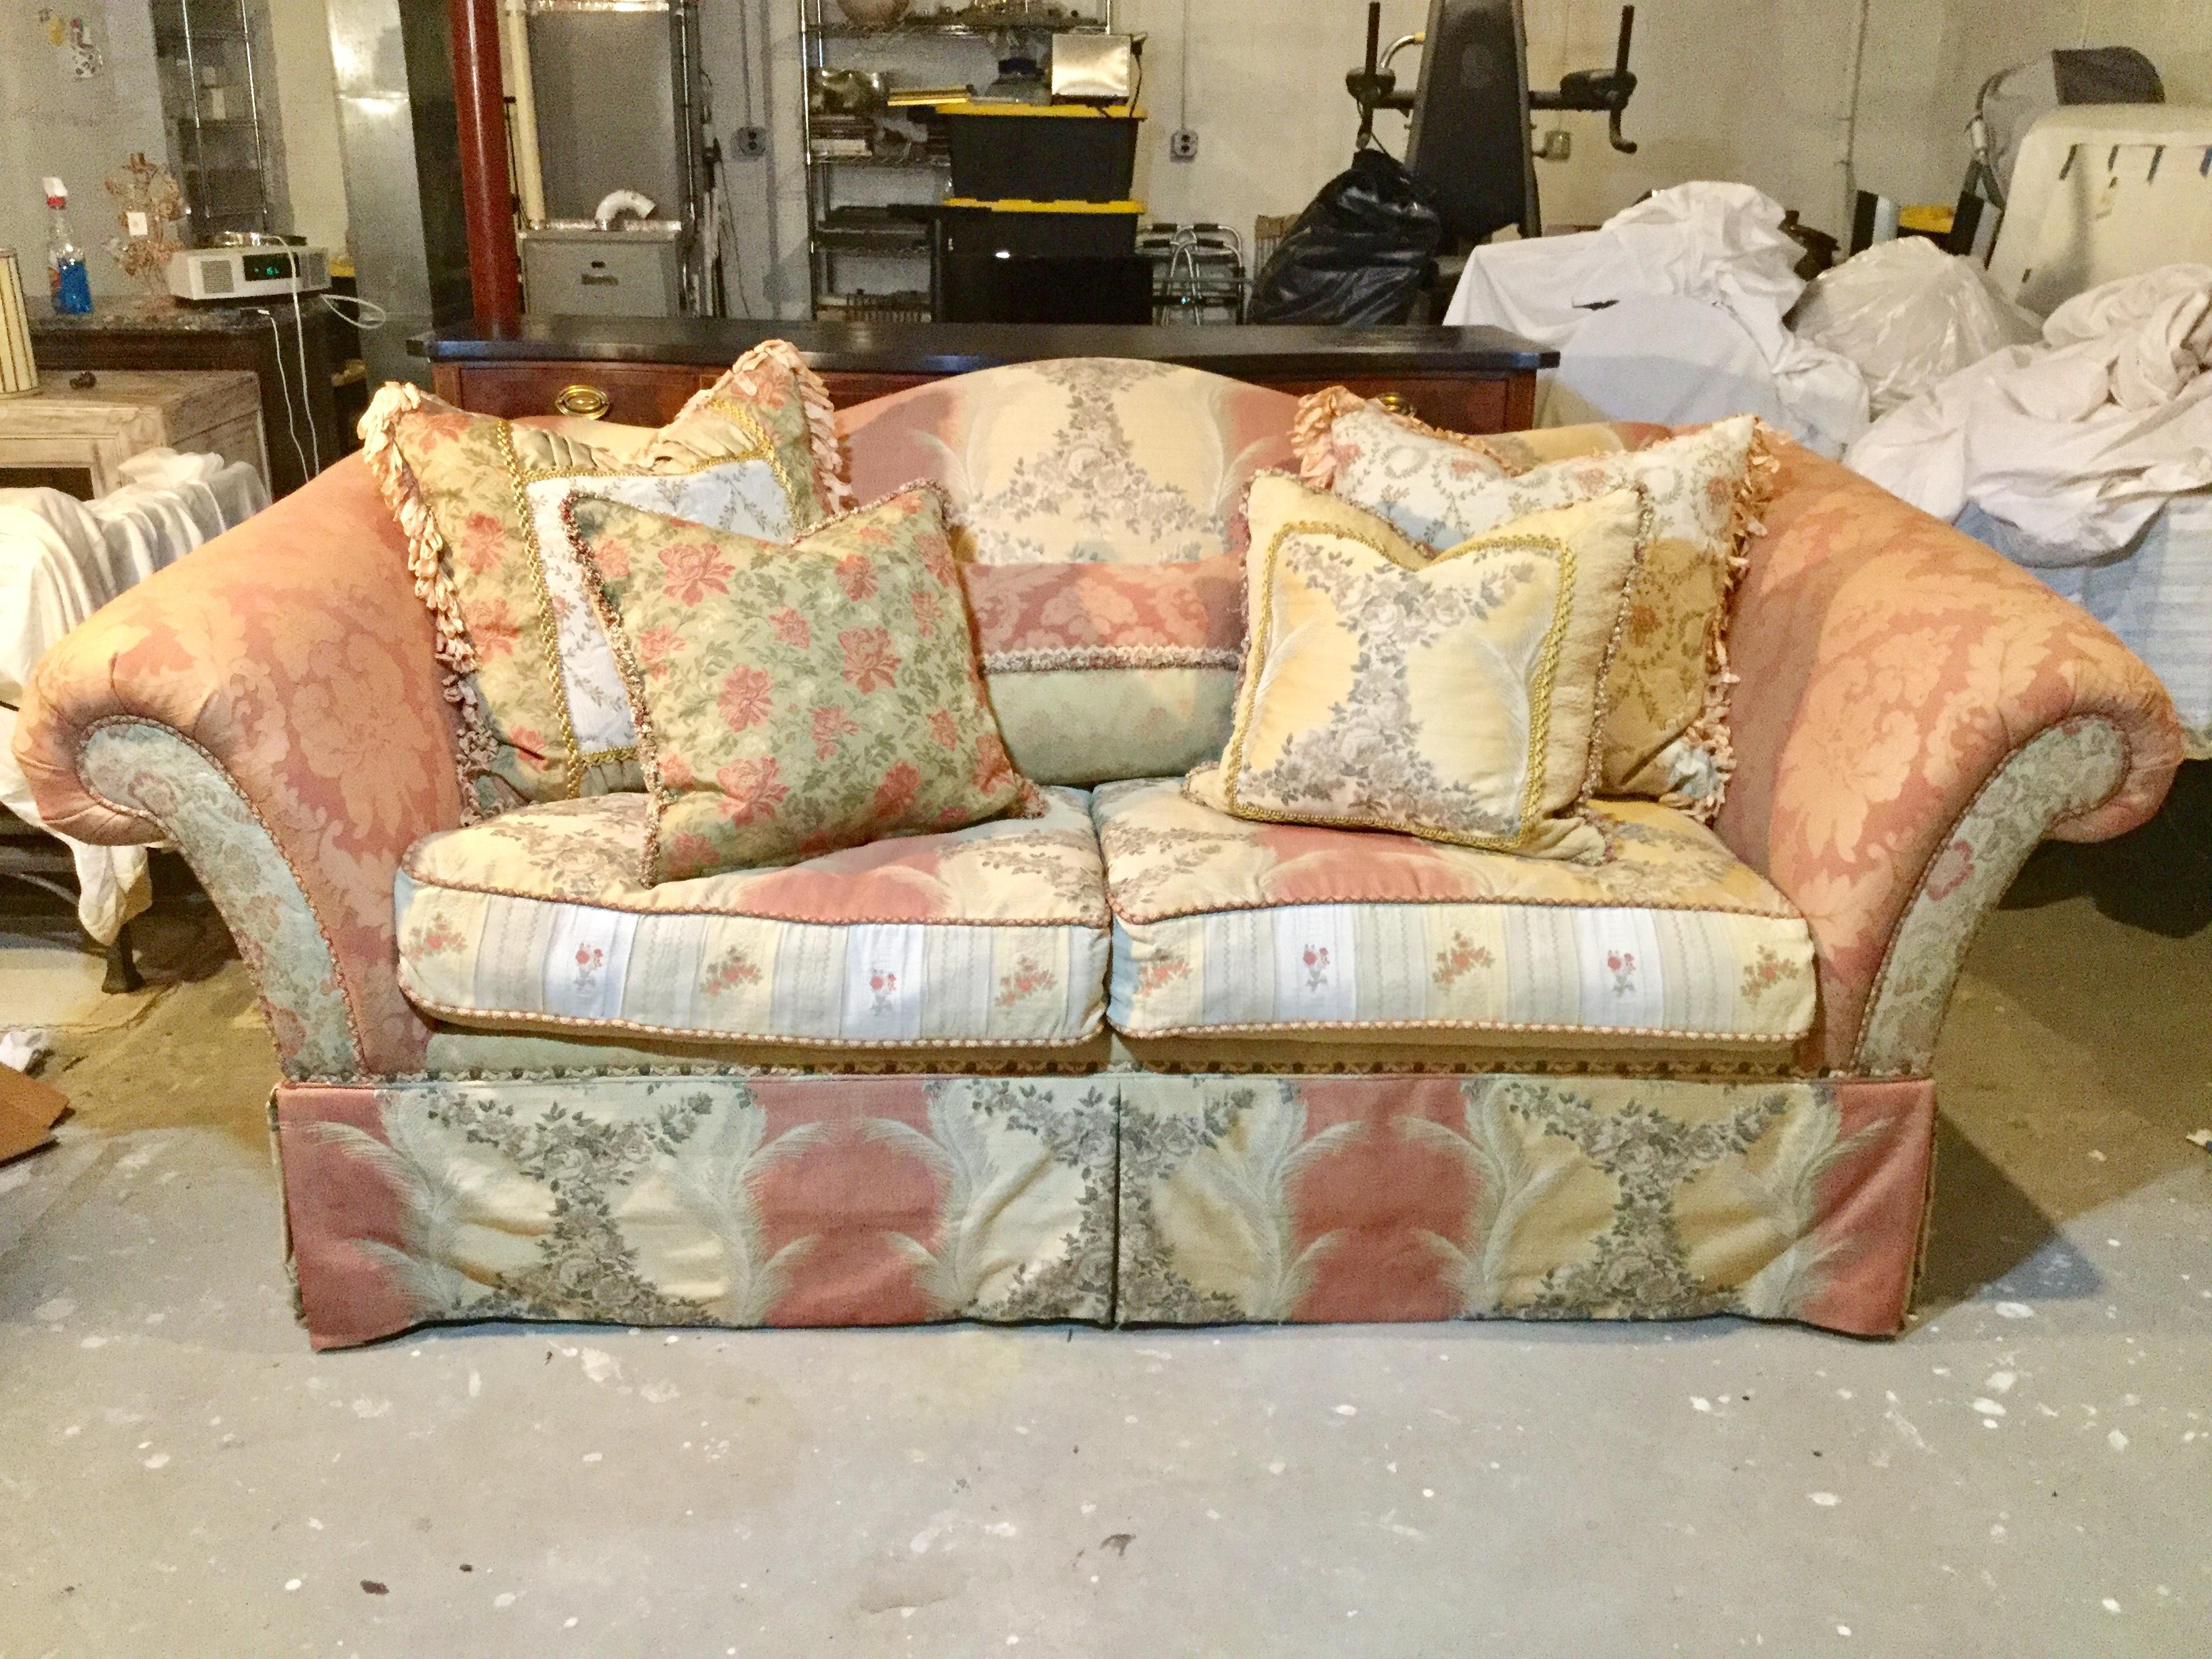 From the Victoria collection of Domain, this couch is super comfy with lots of down-pillows and deep seats. This piece features a multitude of coordinating fabrics for a rich, designer effect. Rounded arms and a high back assure searing comfort.